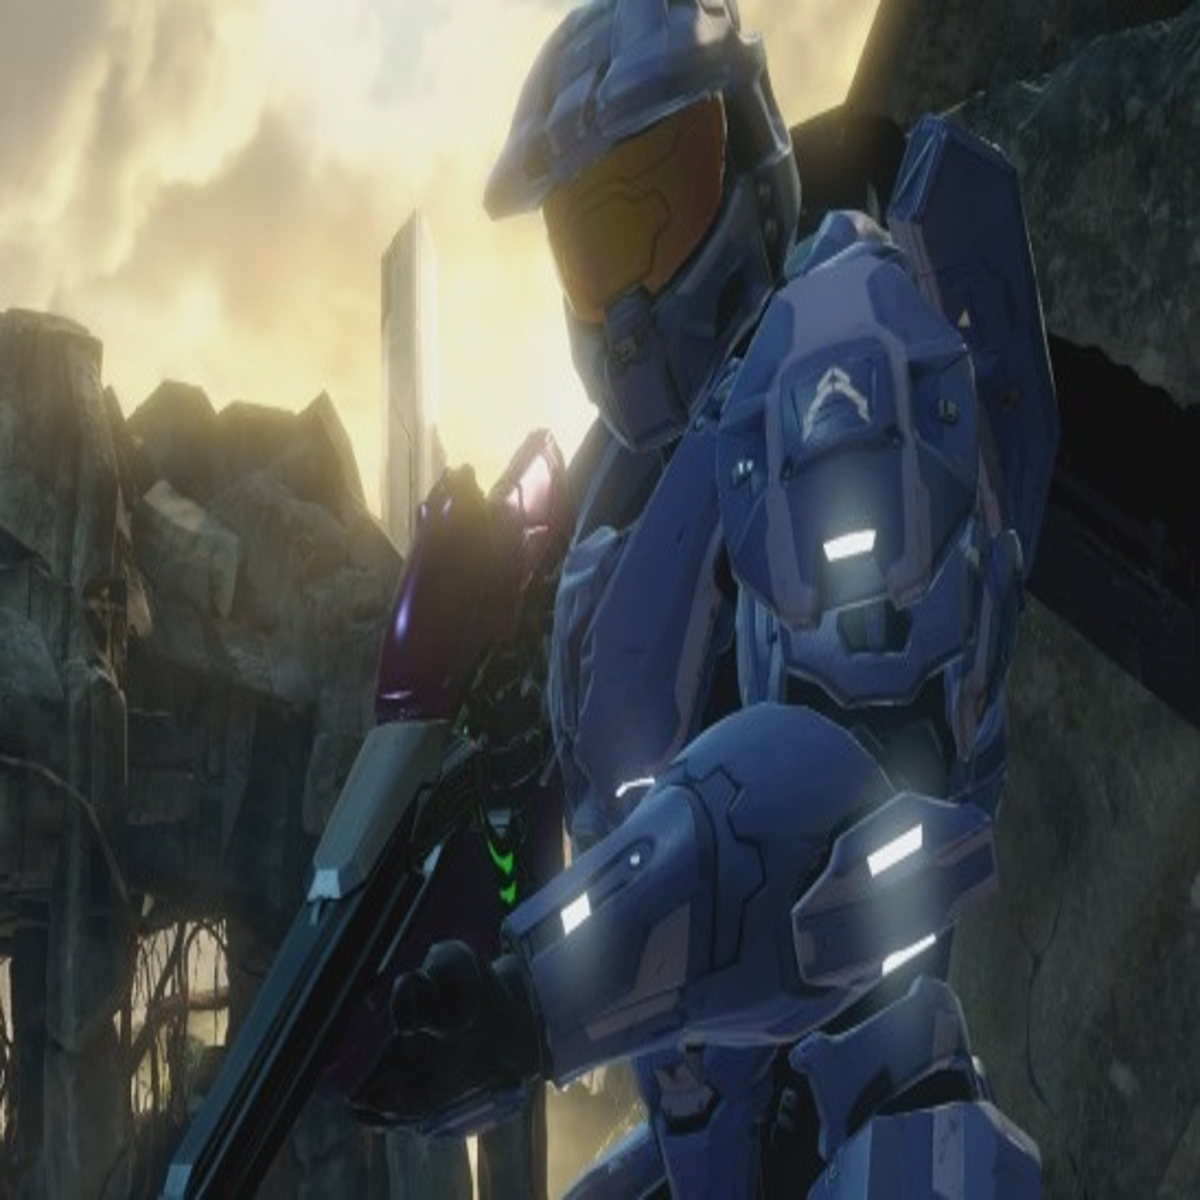 343 to ditch Halo: The Master Chief Collection seasons after Halo